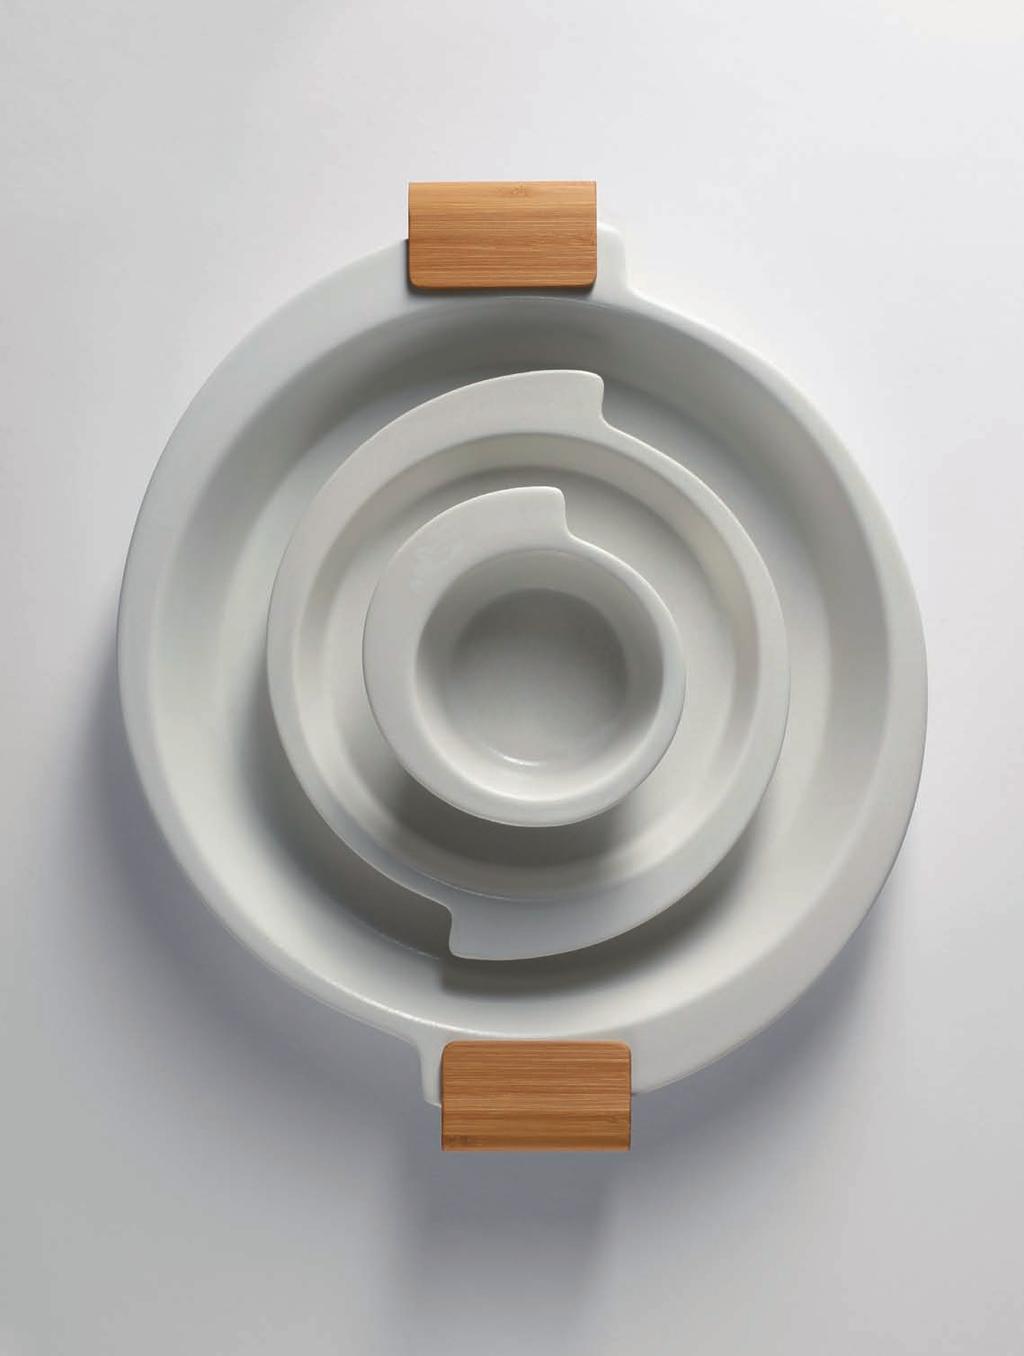 New additions 205 Spin kitchenware